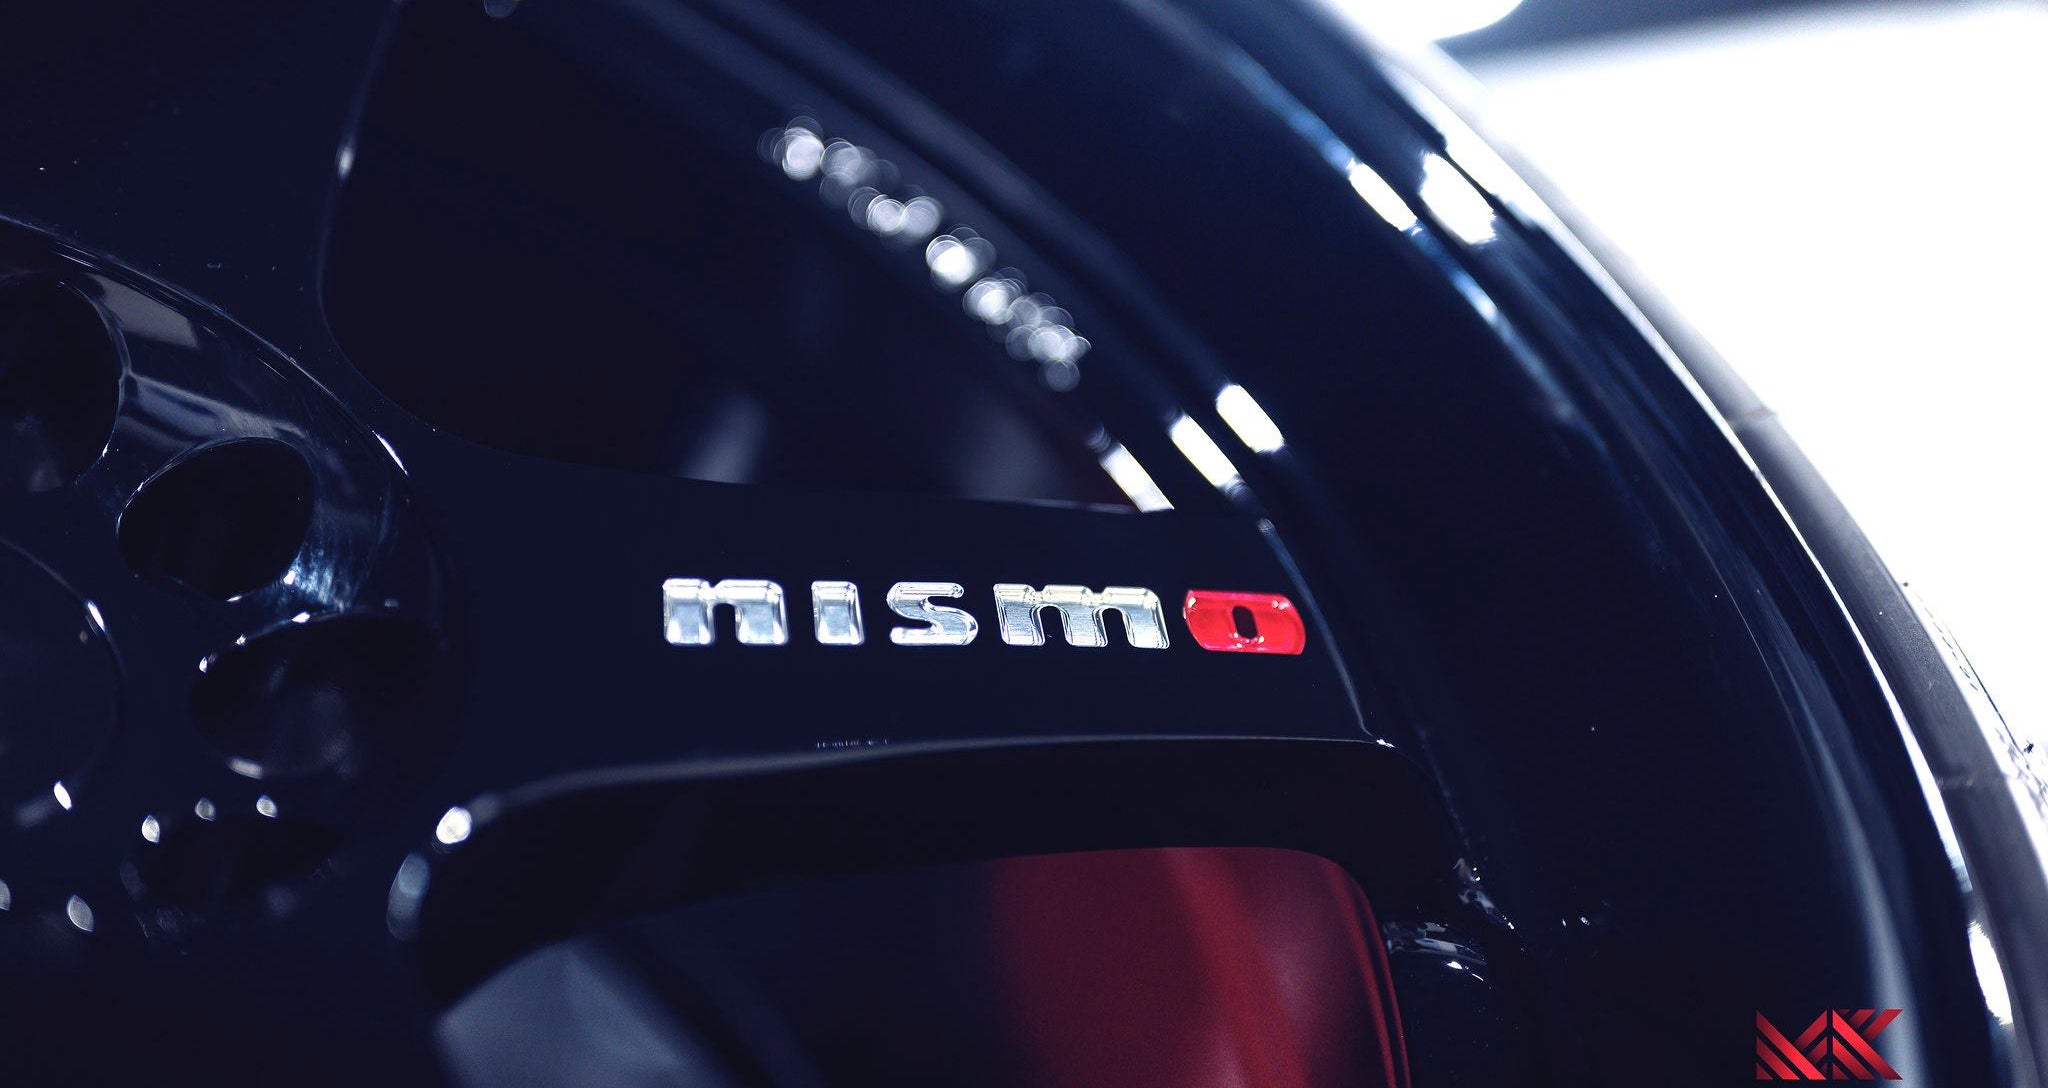 Nismo LMGT4 - Premium Wheels from Nismo - From just $4990.00! Shop now at MK MOTORSPORTS